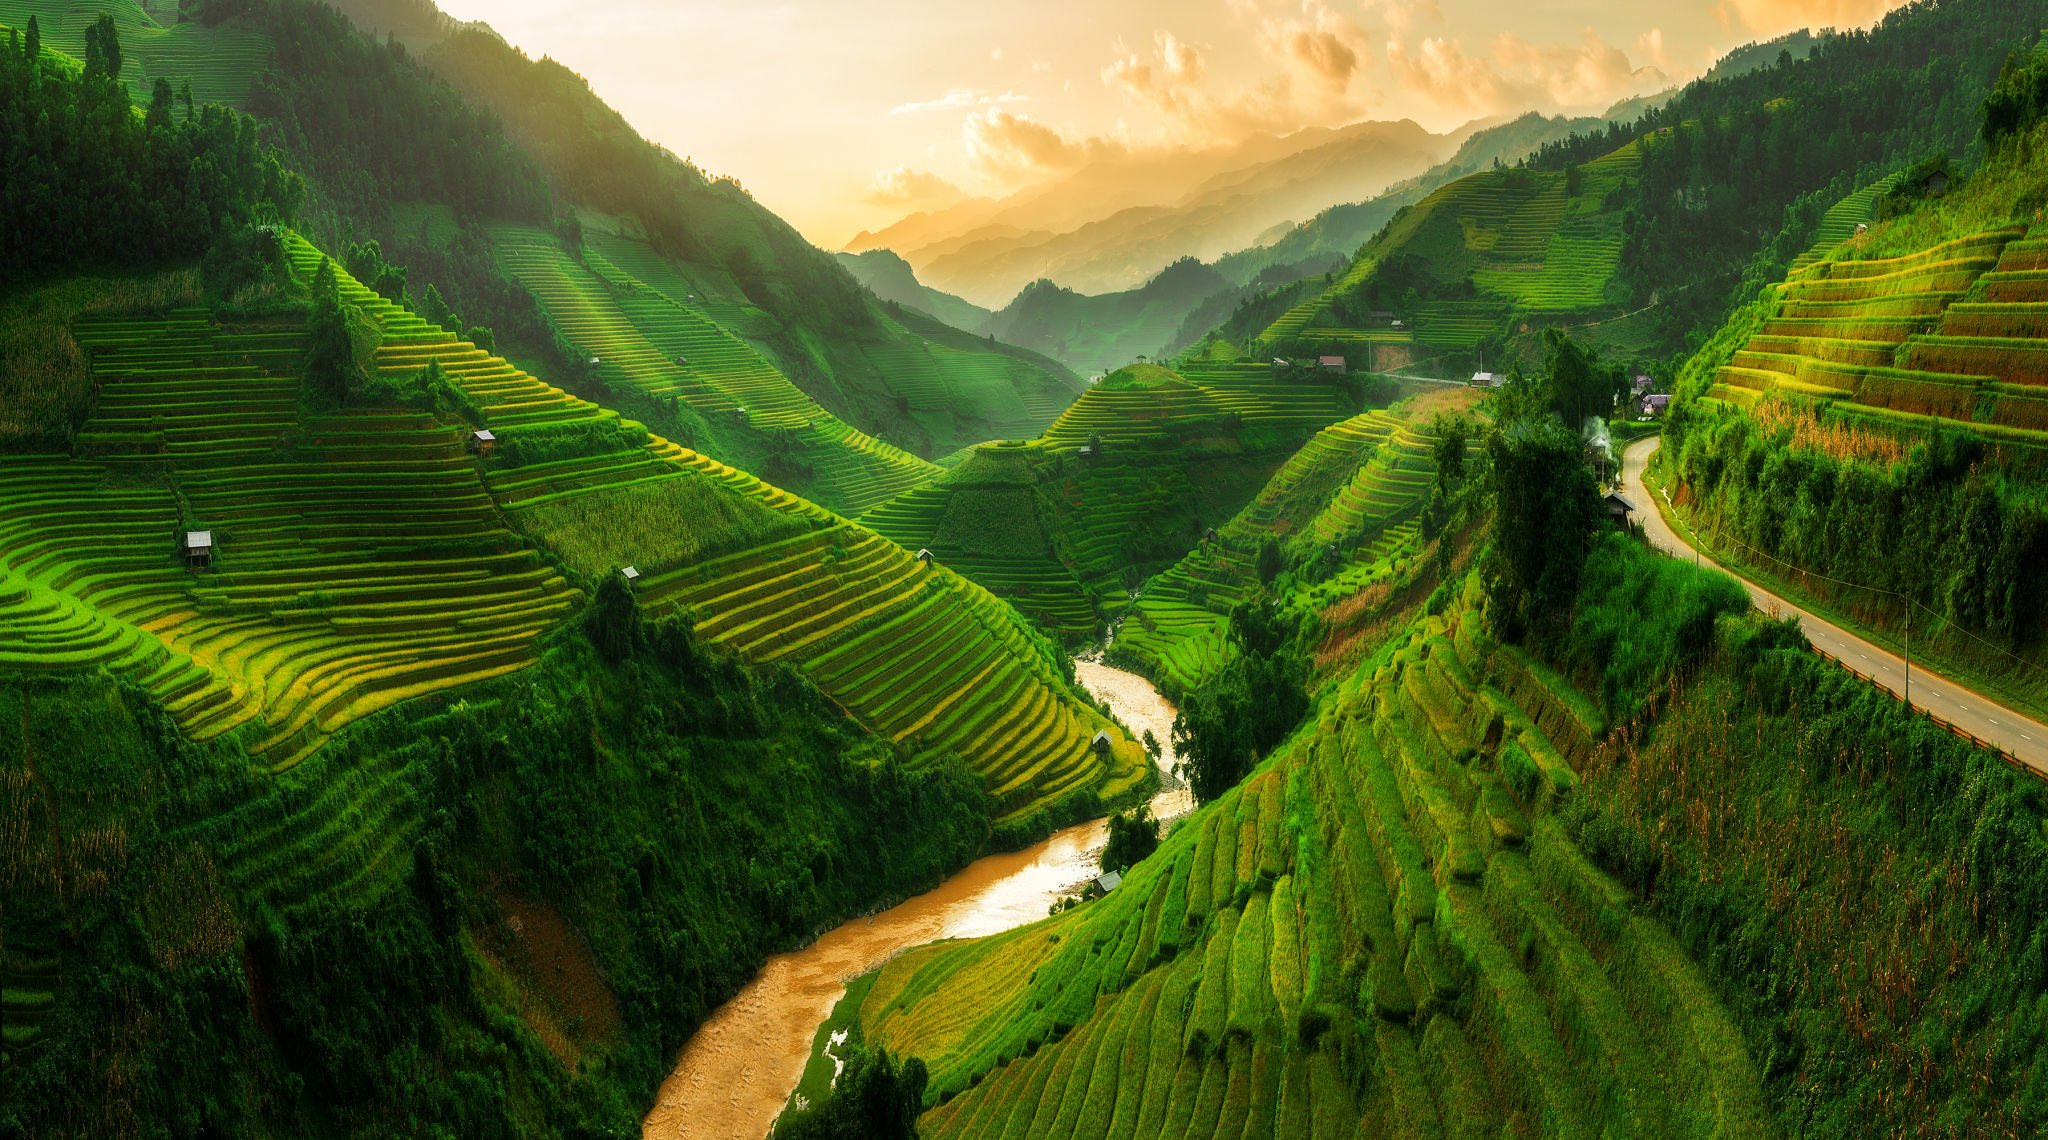 Terraced rice field landscape near Sapa in Vietnam. Mu Cang Chai Rice Terrace Fields stretching across the mountainside, layer by layer reaching up as endless, with about 2,200 hectares of rice terraces, of which 500 hectares of terraces of 3 communes such as La Pan Tan, Che Cu Nha and Ze Xu Phinh.